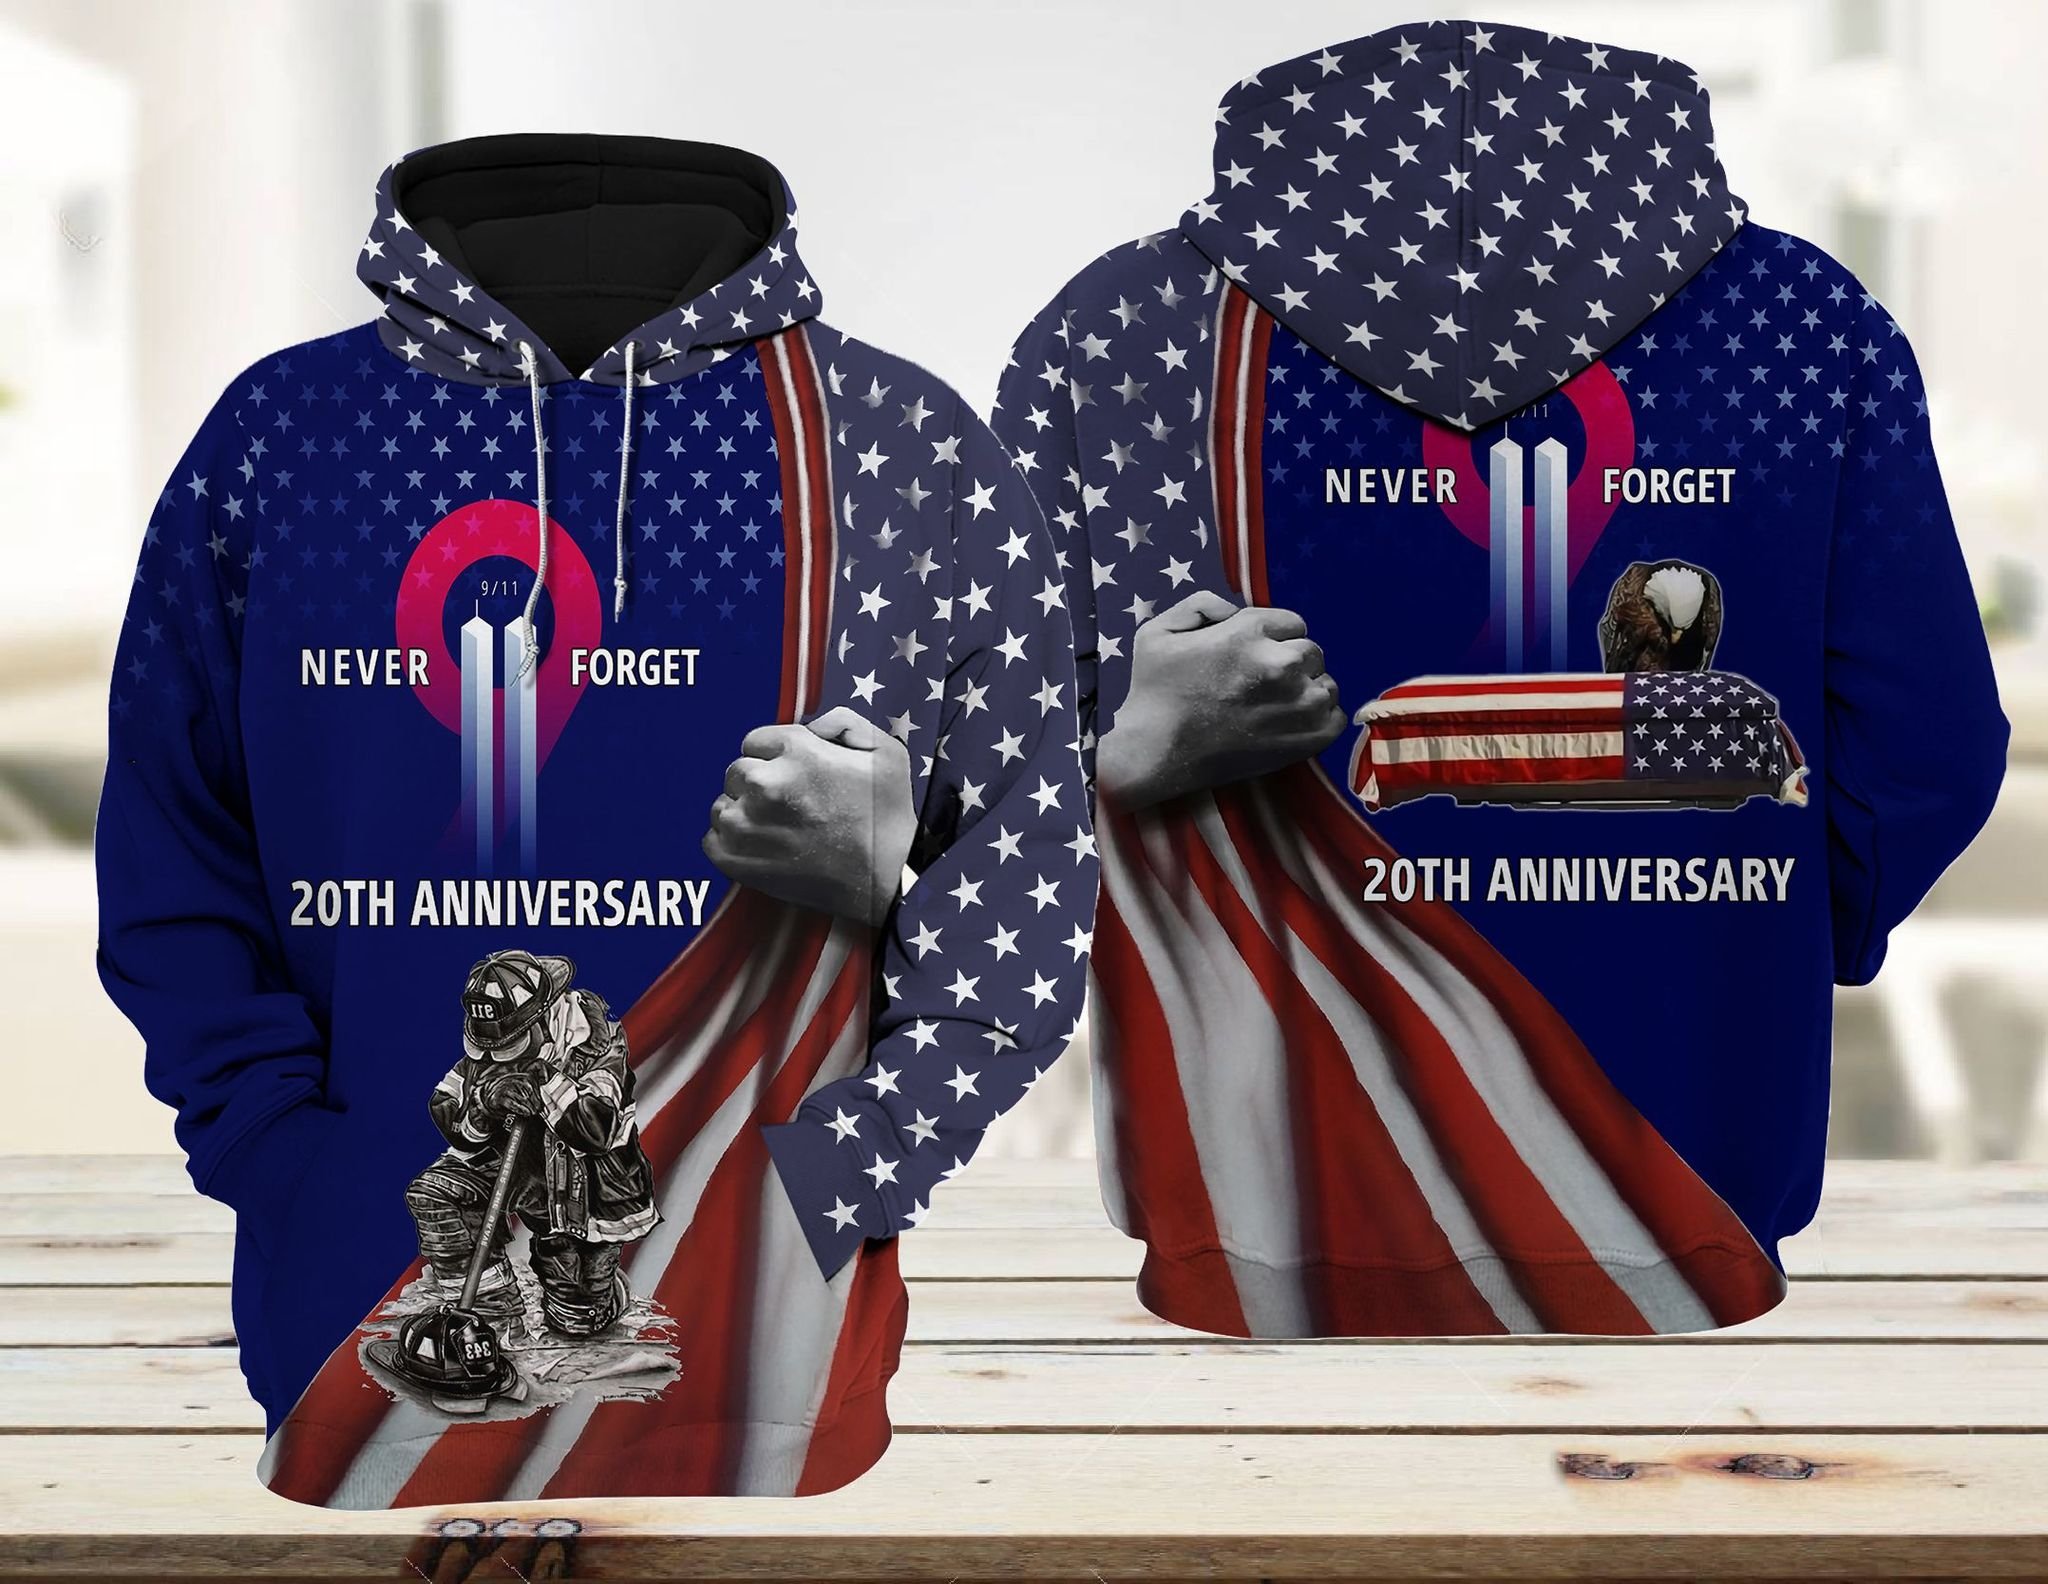 Patriot Firefighter 911 20th Anniversary Never Forget 3D Hoodie and shirt